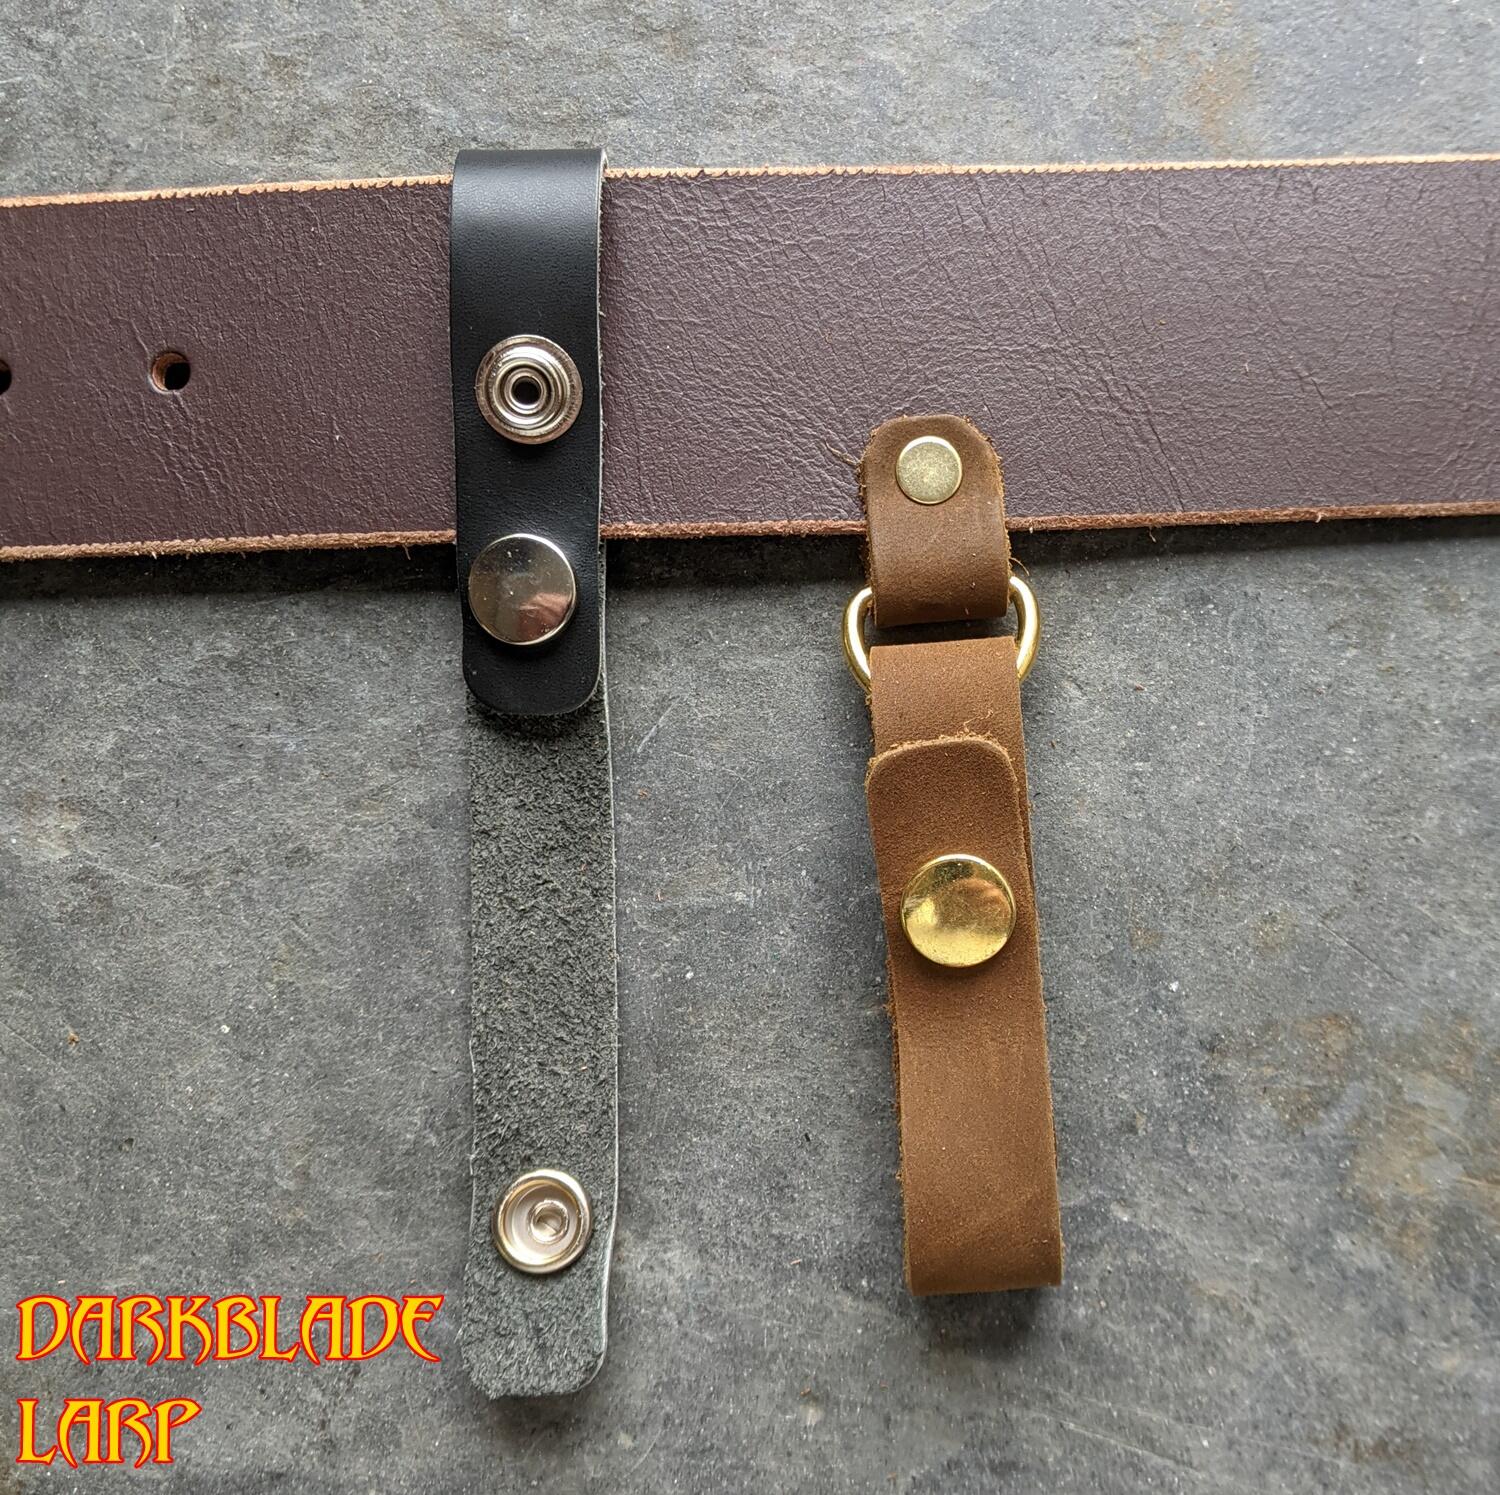 small clip strap to fit onto a belt